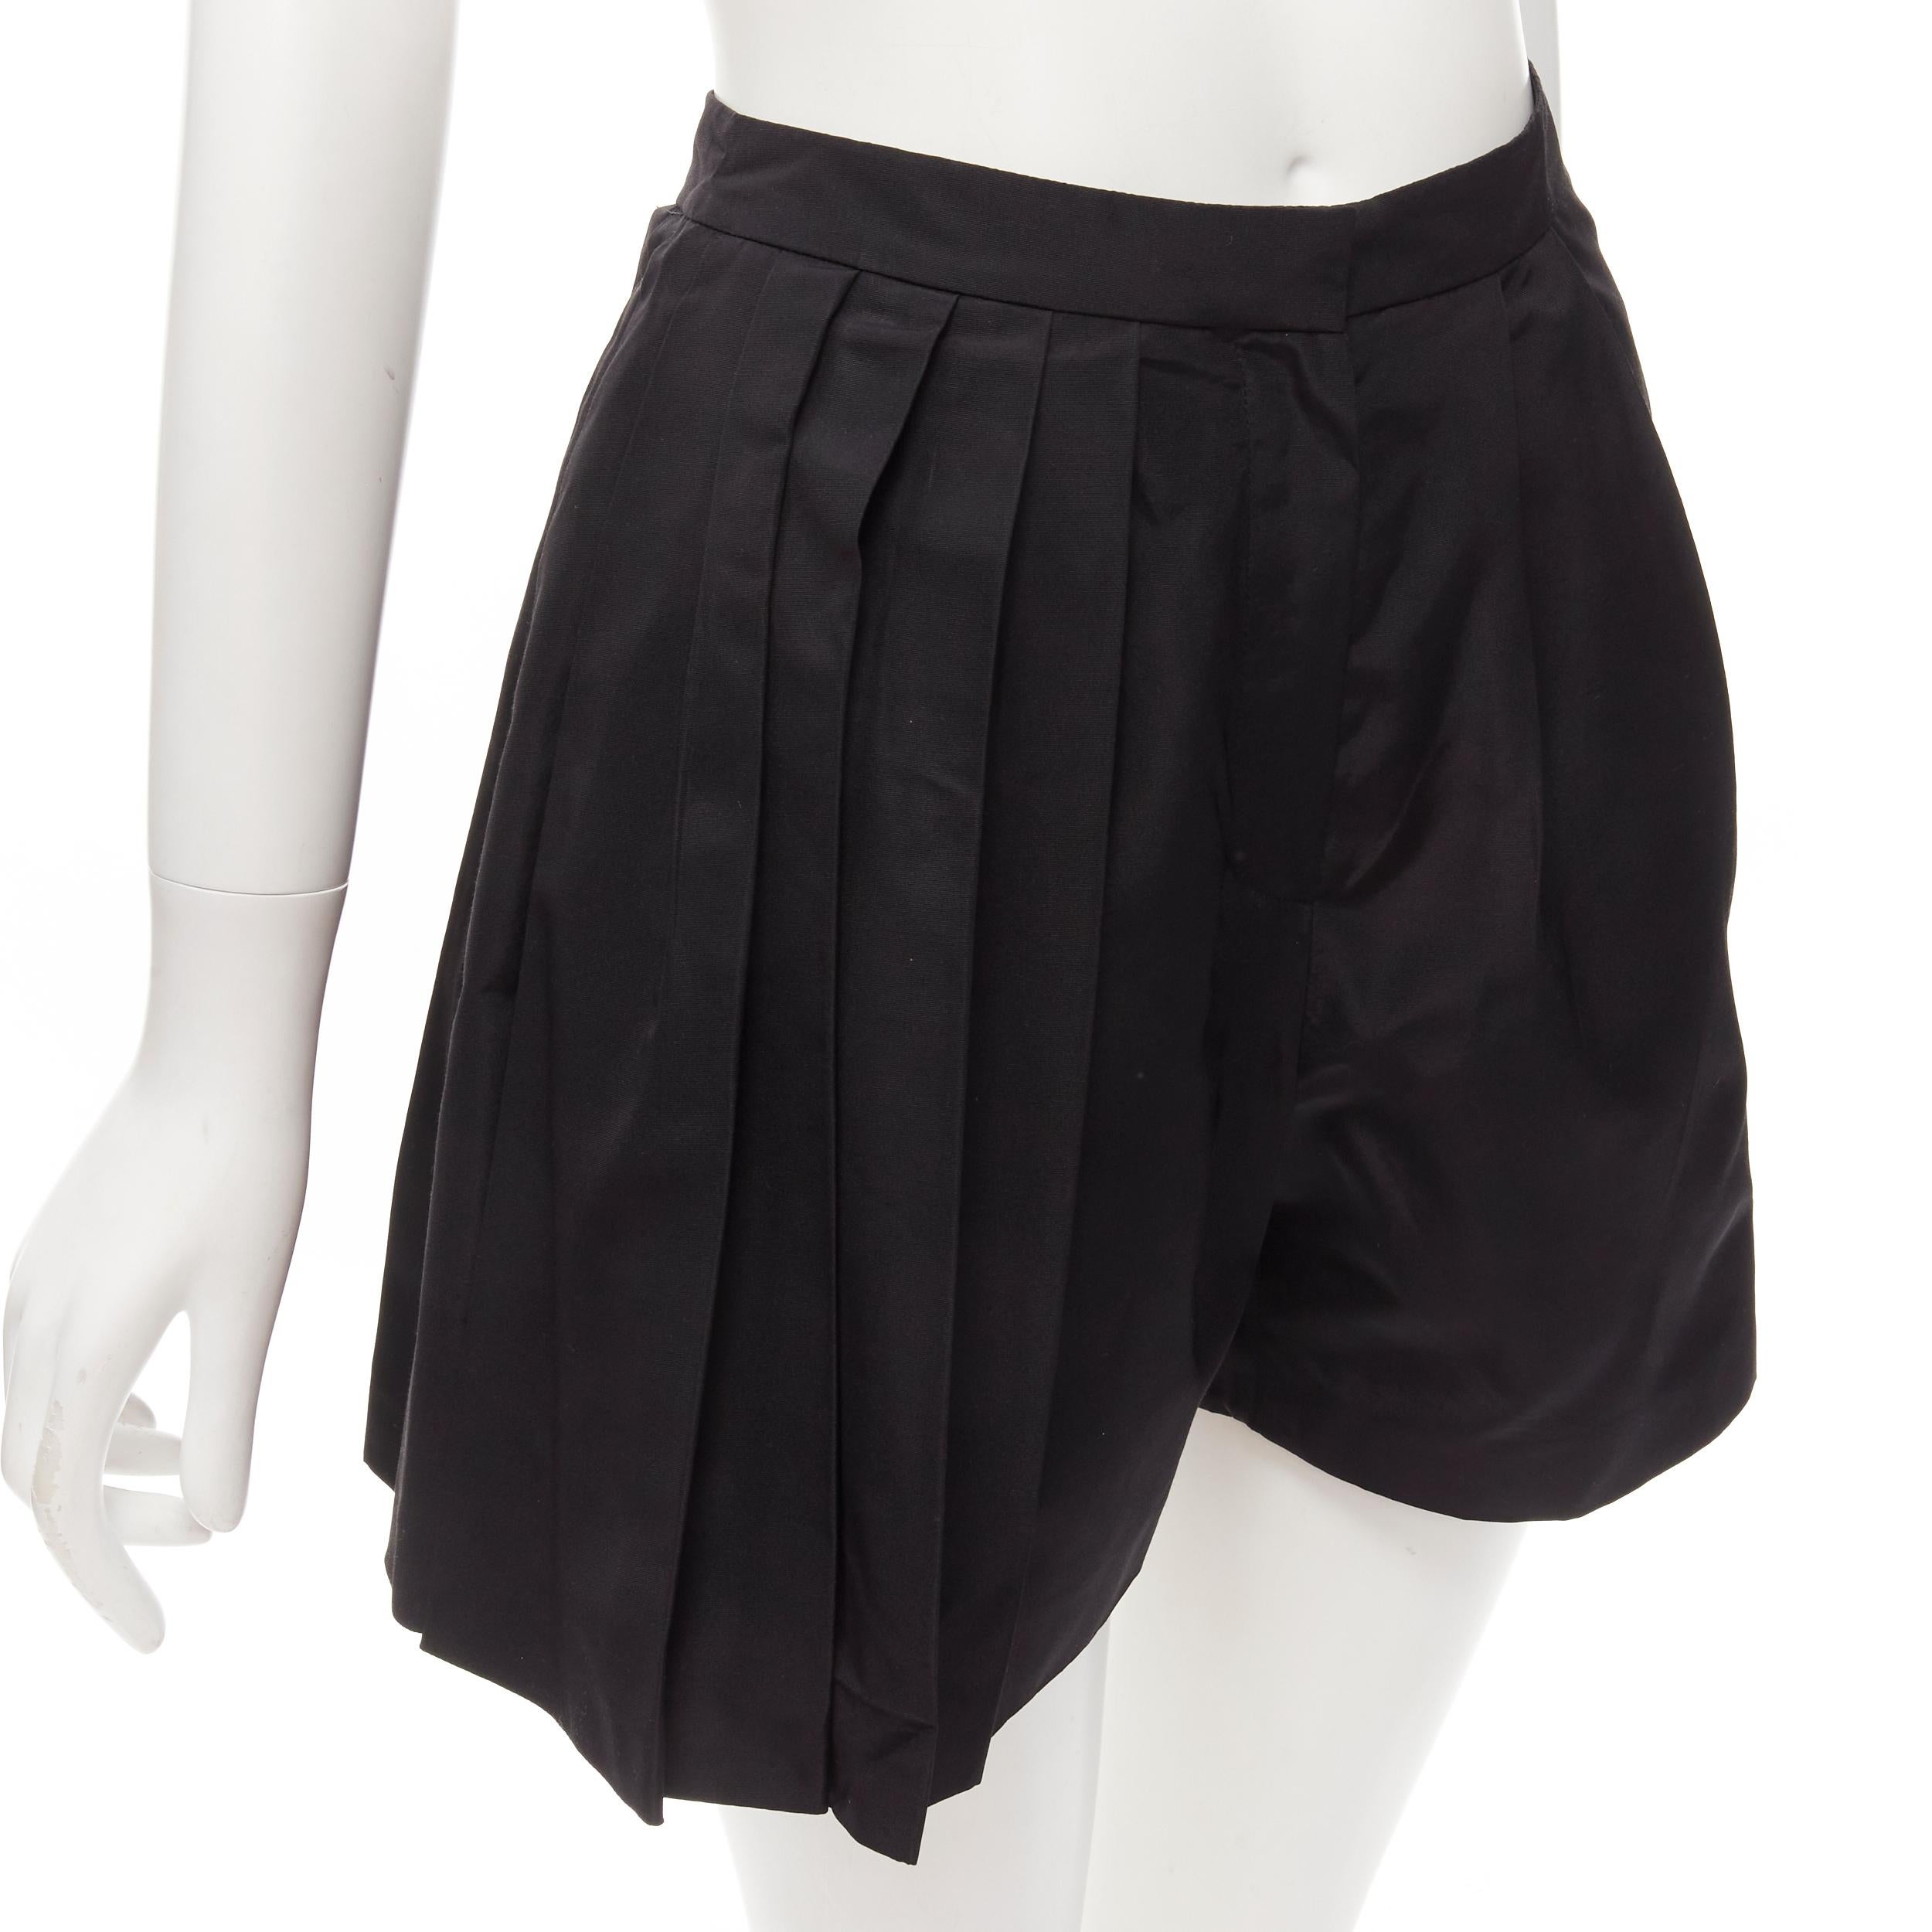 CHRISTIAN DIOR Raf Simons black silk asymmetrical pleated flared shorts FR34 XS
Reference: AAWC/A00368
Brand: Christian Dior
Designer: Raf Simons
Material: 100% Silk
Color: Black
Pattern: Solid
Closure: Zip Fly
Extra Details: One slit pocket at the